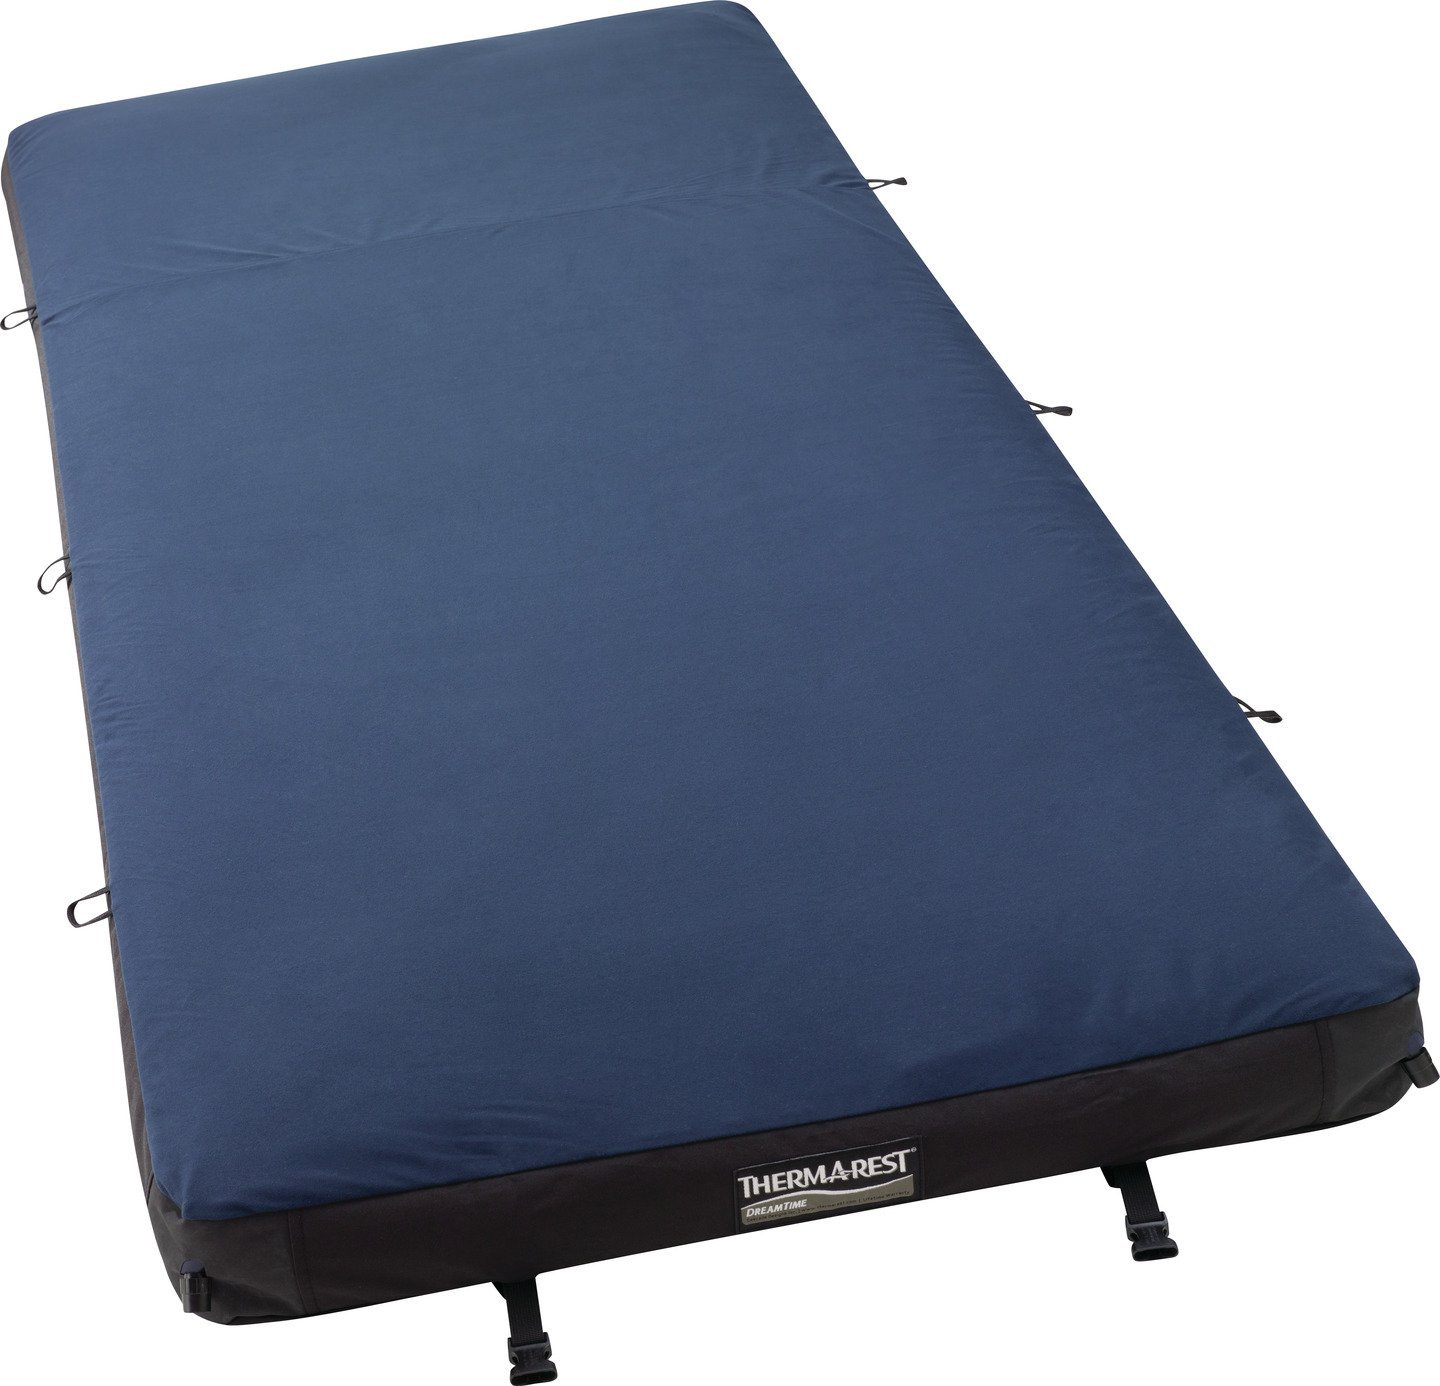 The Best High End Self Inflating Air Mattress For Camping